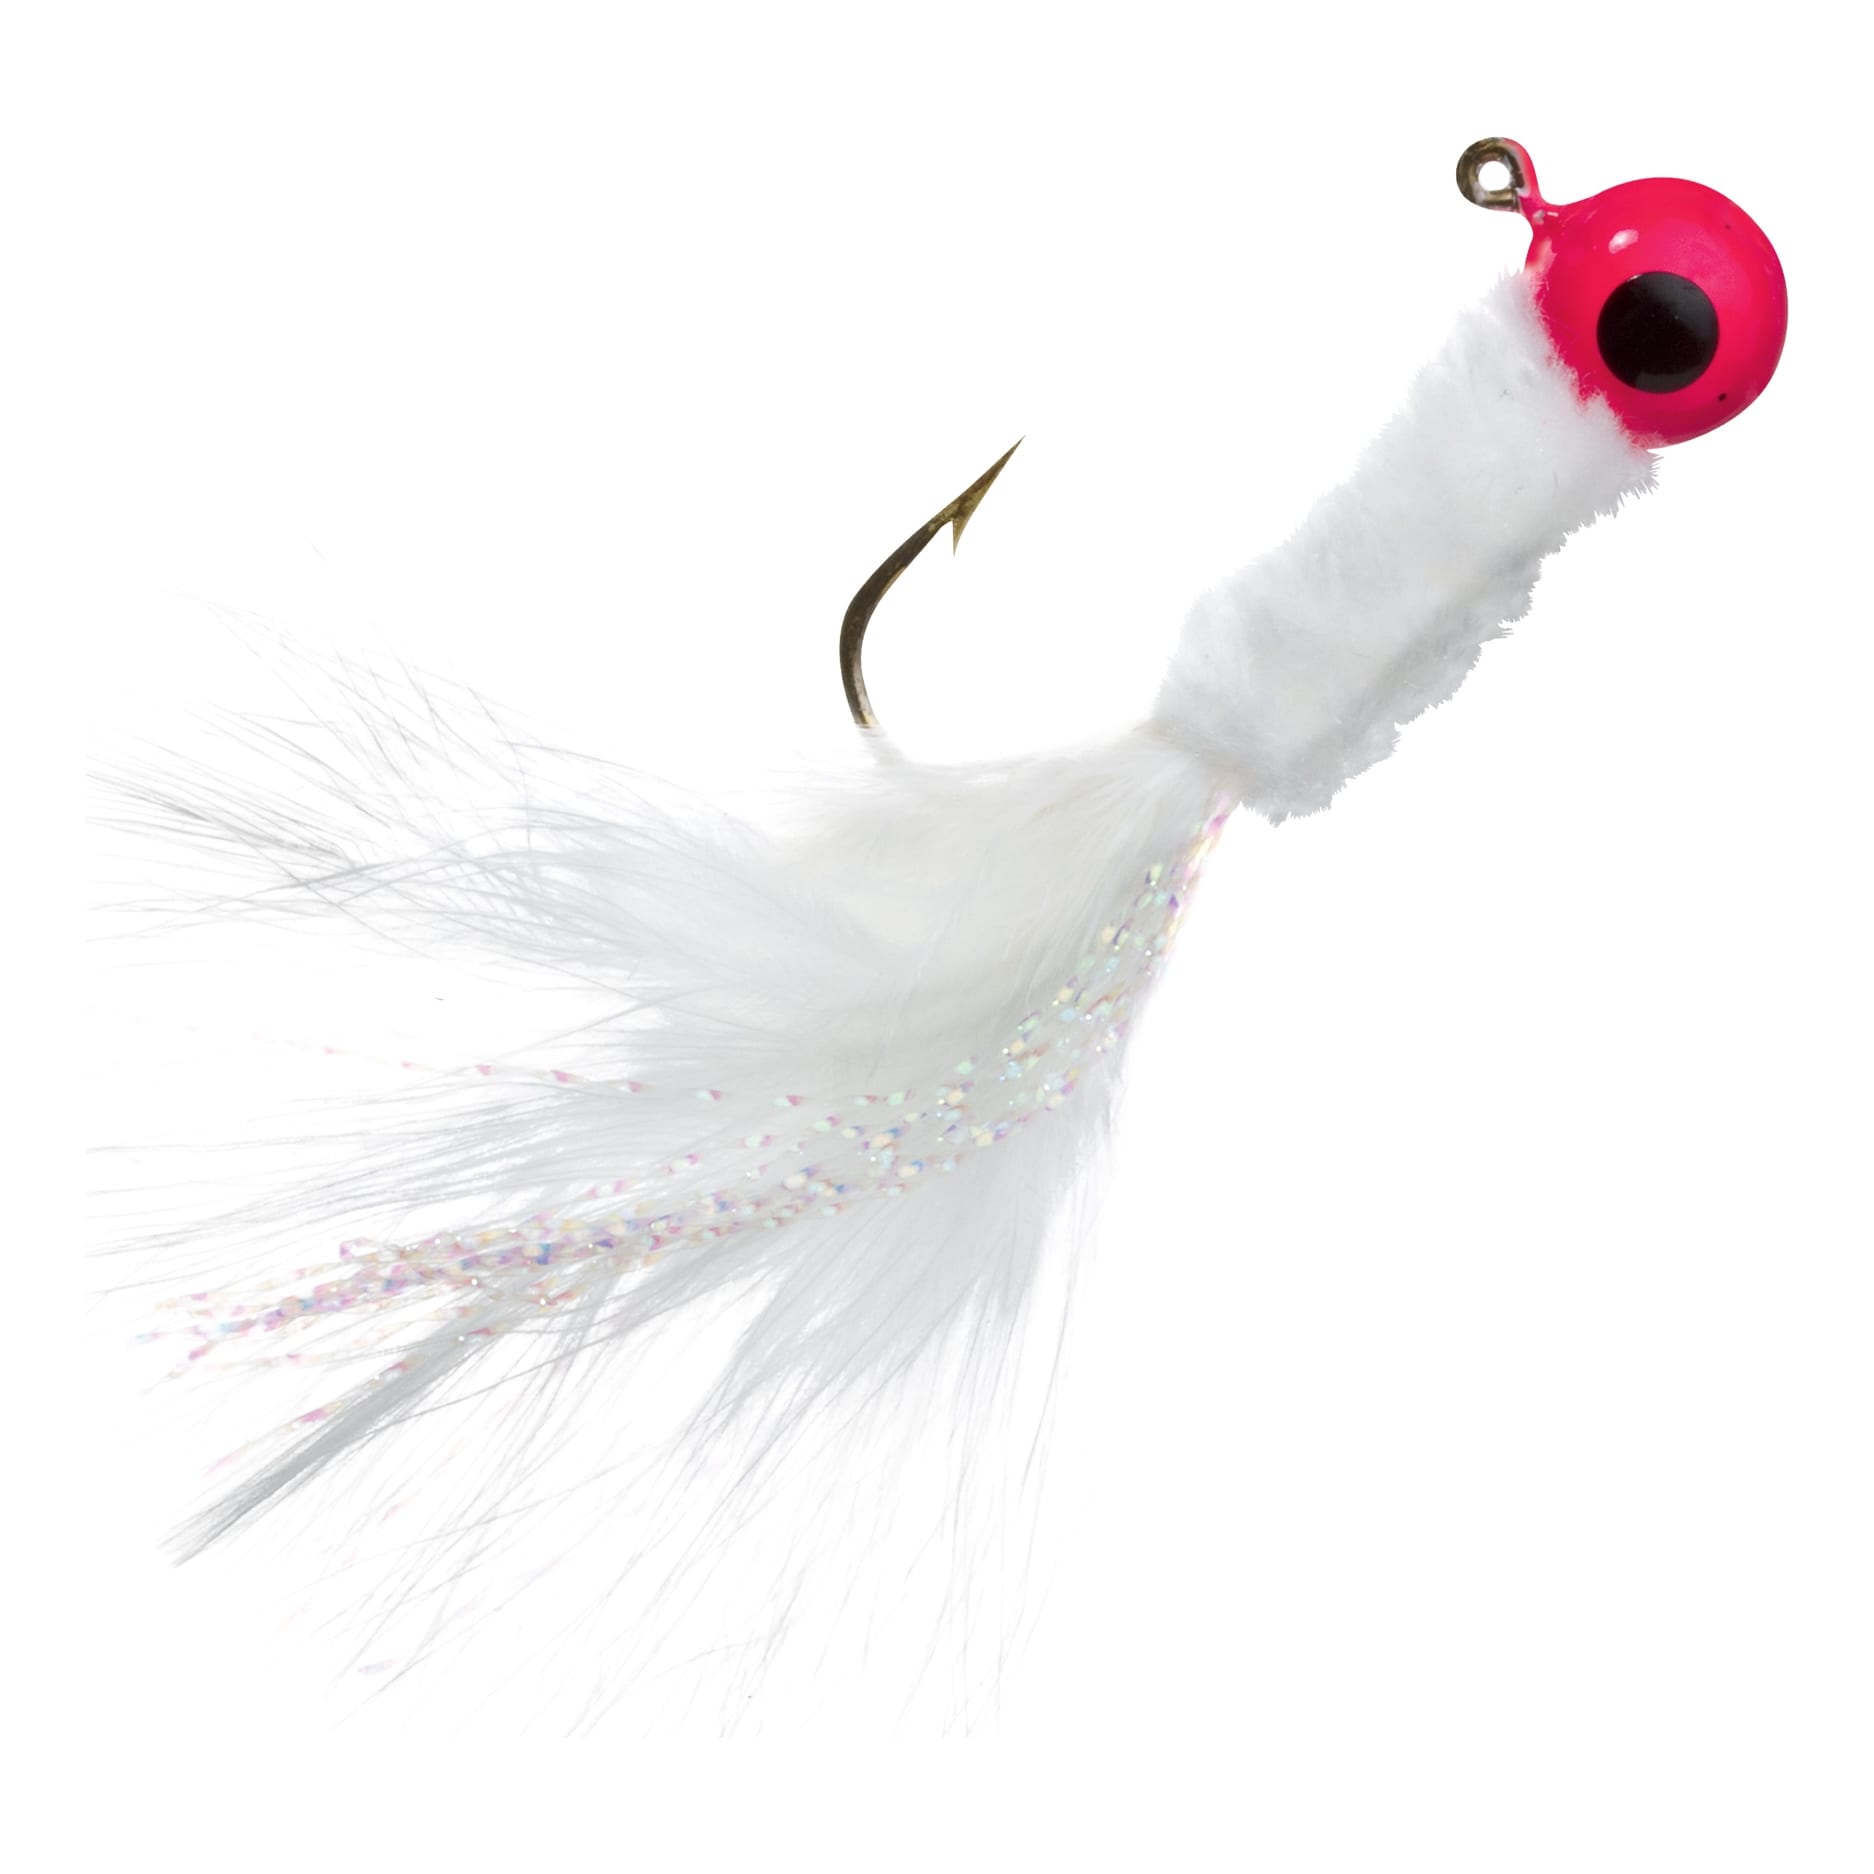 NEW INSIDER 1/16 OZ CRAPPIE TUBE JIG HEADS with sz 4 EAGLE CLAW